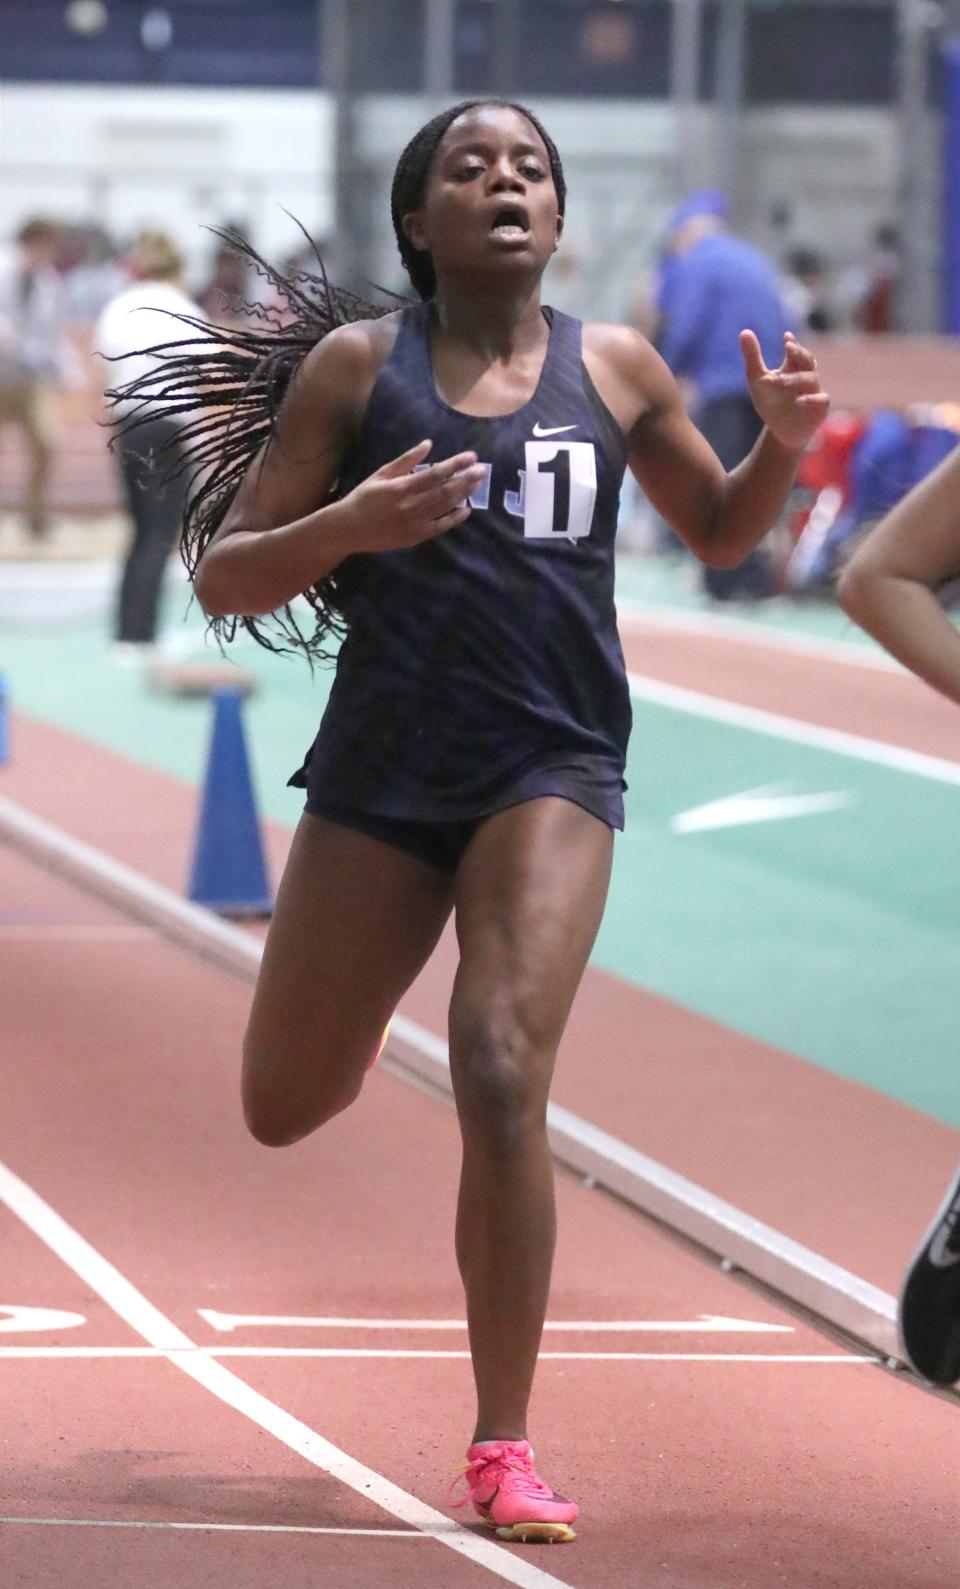 John Jay-East Fishkill's Estella Pouani won the Northern County 1000-meter run at the Rockland and Northern Counties track and field championships at the Armory Jan. 26, 2024.